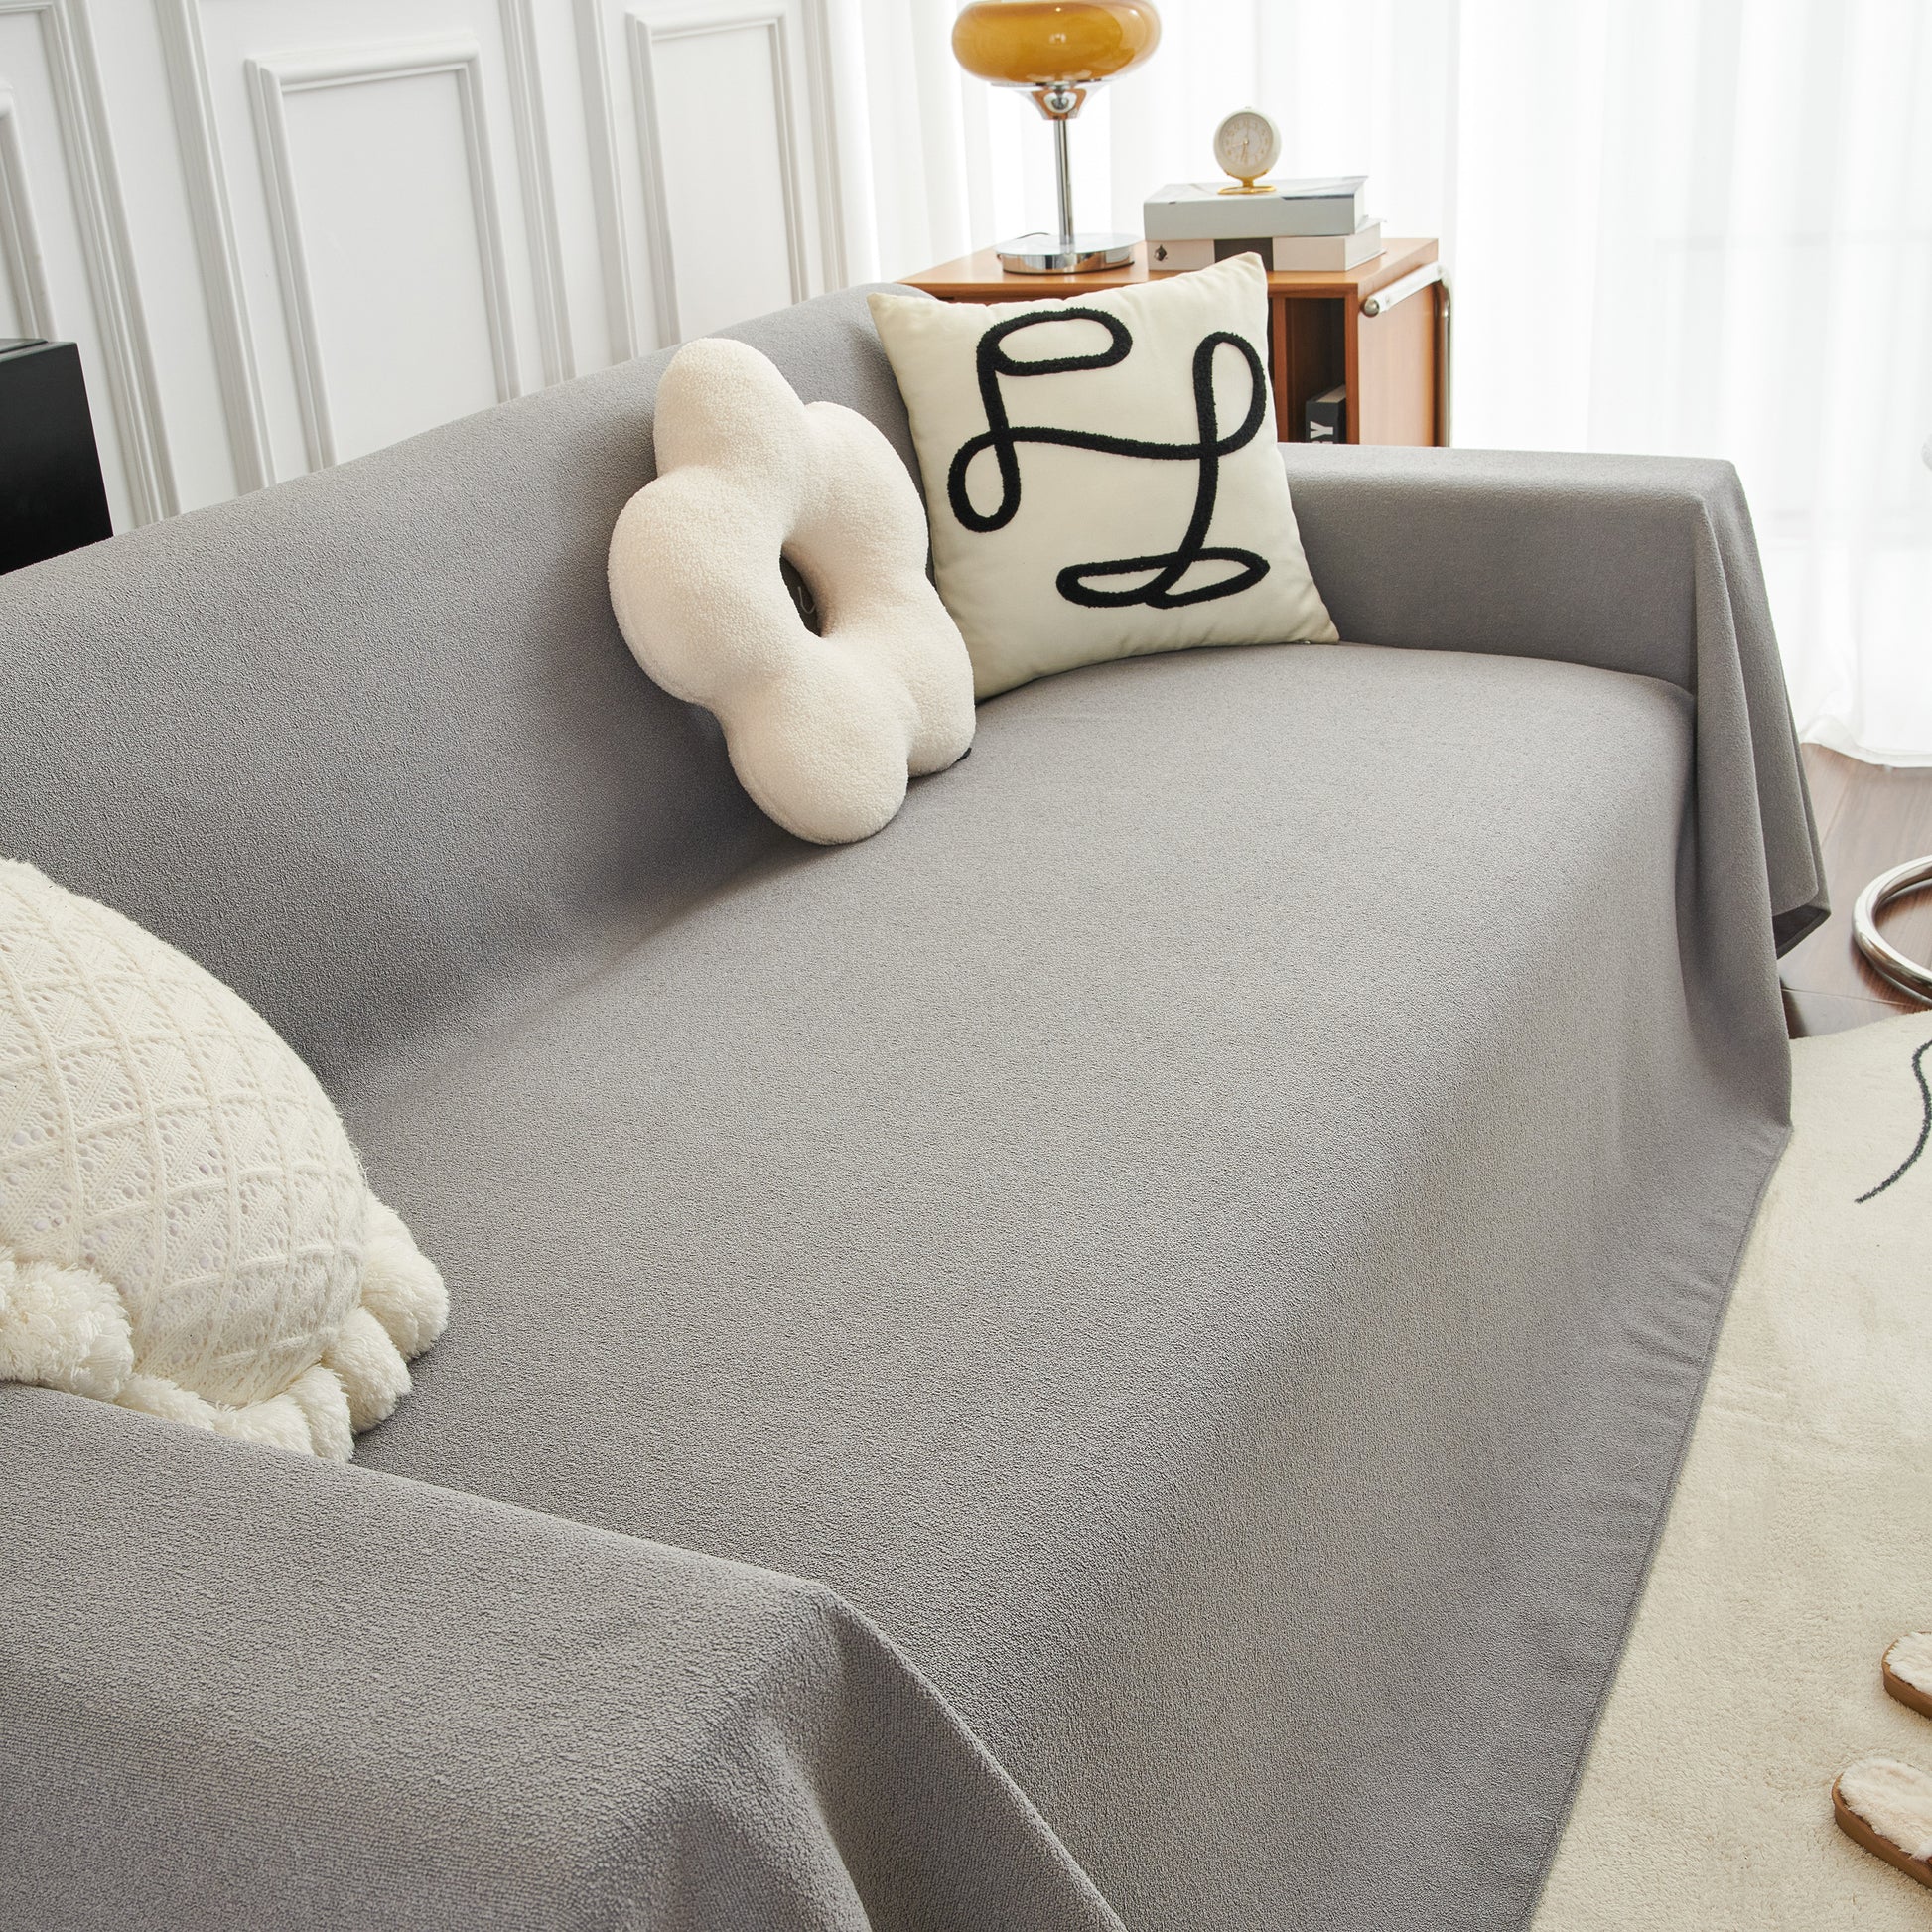 Teddy Sofa Towel, Waterproof, Dustproof Cover, Cozy Throw Blanket and  Stylish Slipcover for Couch